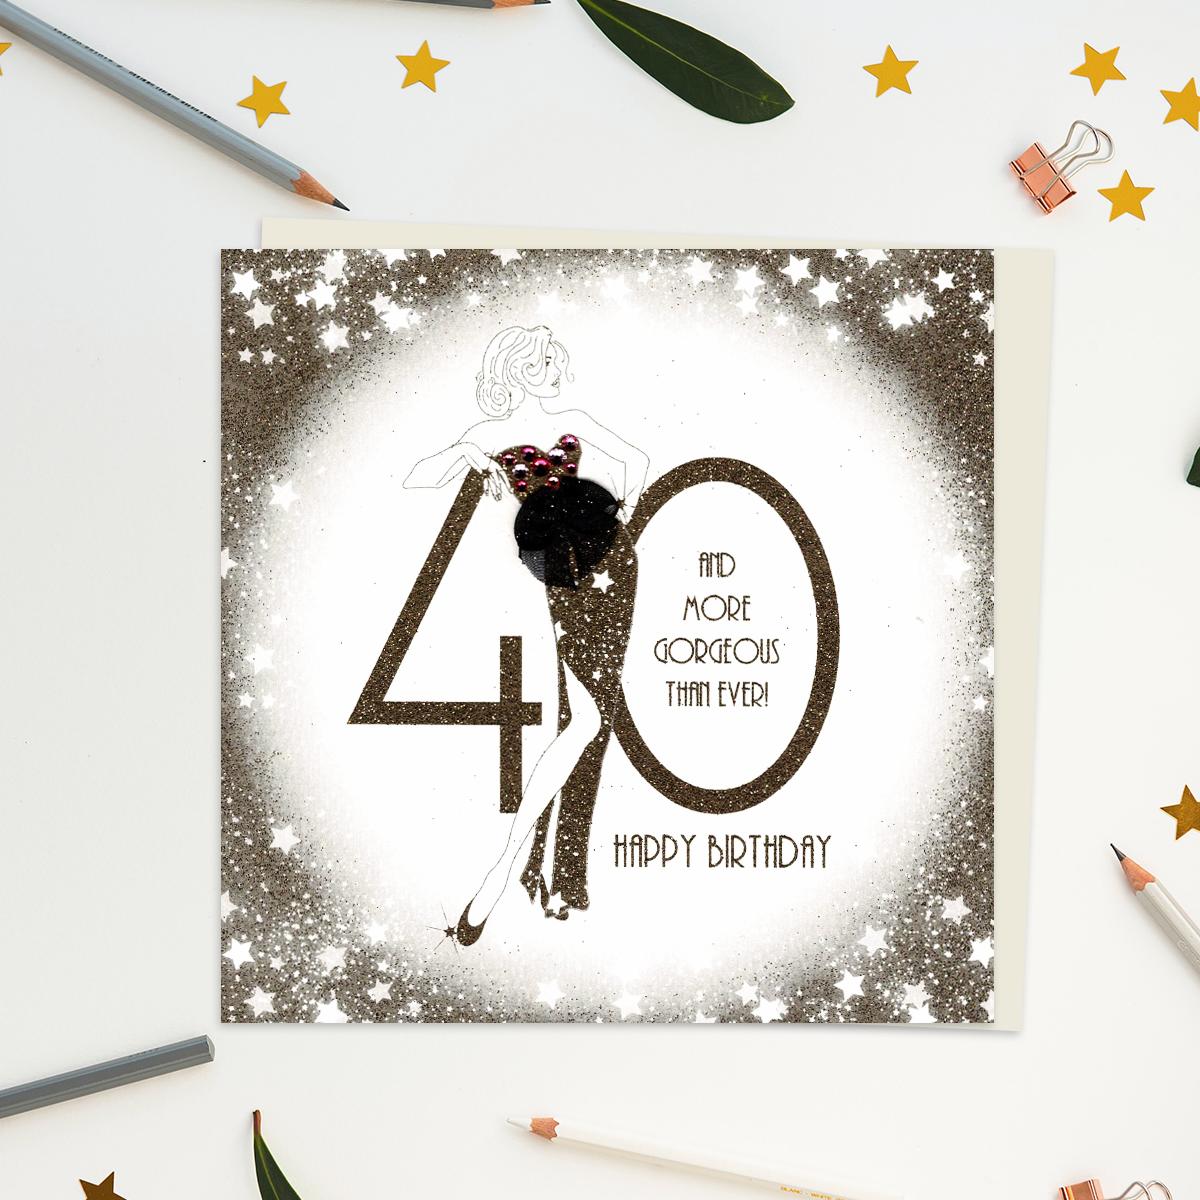 A stunning handcrafted card on embossed card showing a woman leaning on the number 40. Caption: 40 And More Gorgeous Than Ever! Happy Birthday. Gold Glitter Accents, Gem Embellishments And additional Attachments On This Luxury Design From Five Dollar Shake. Blank inside For Your Own Message. Complete With Ivory Envelope